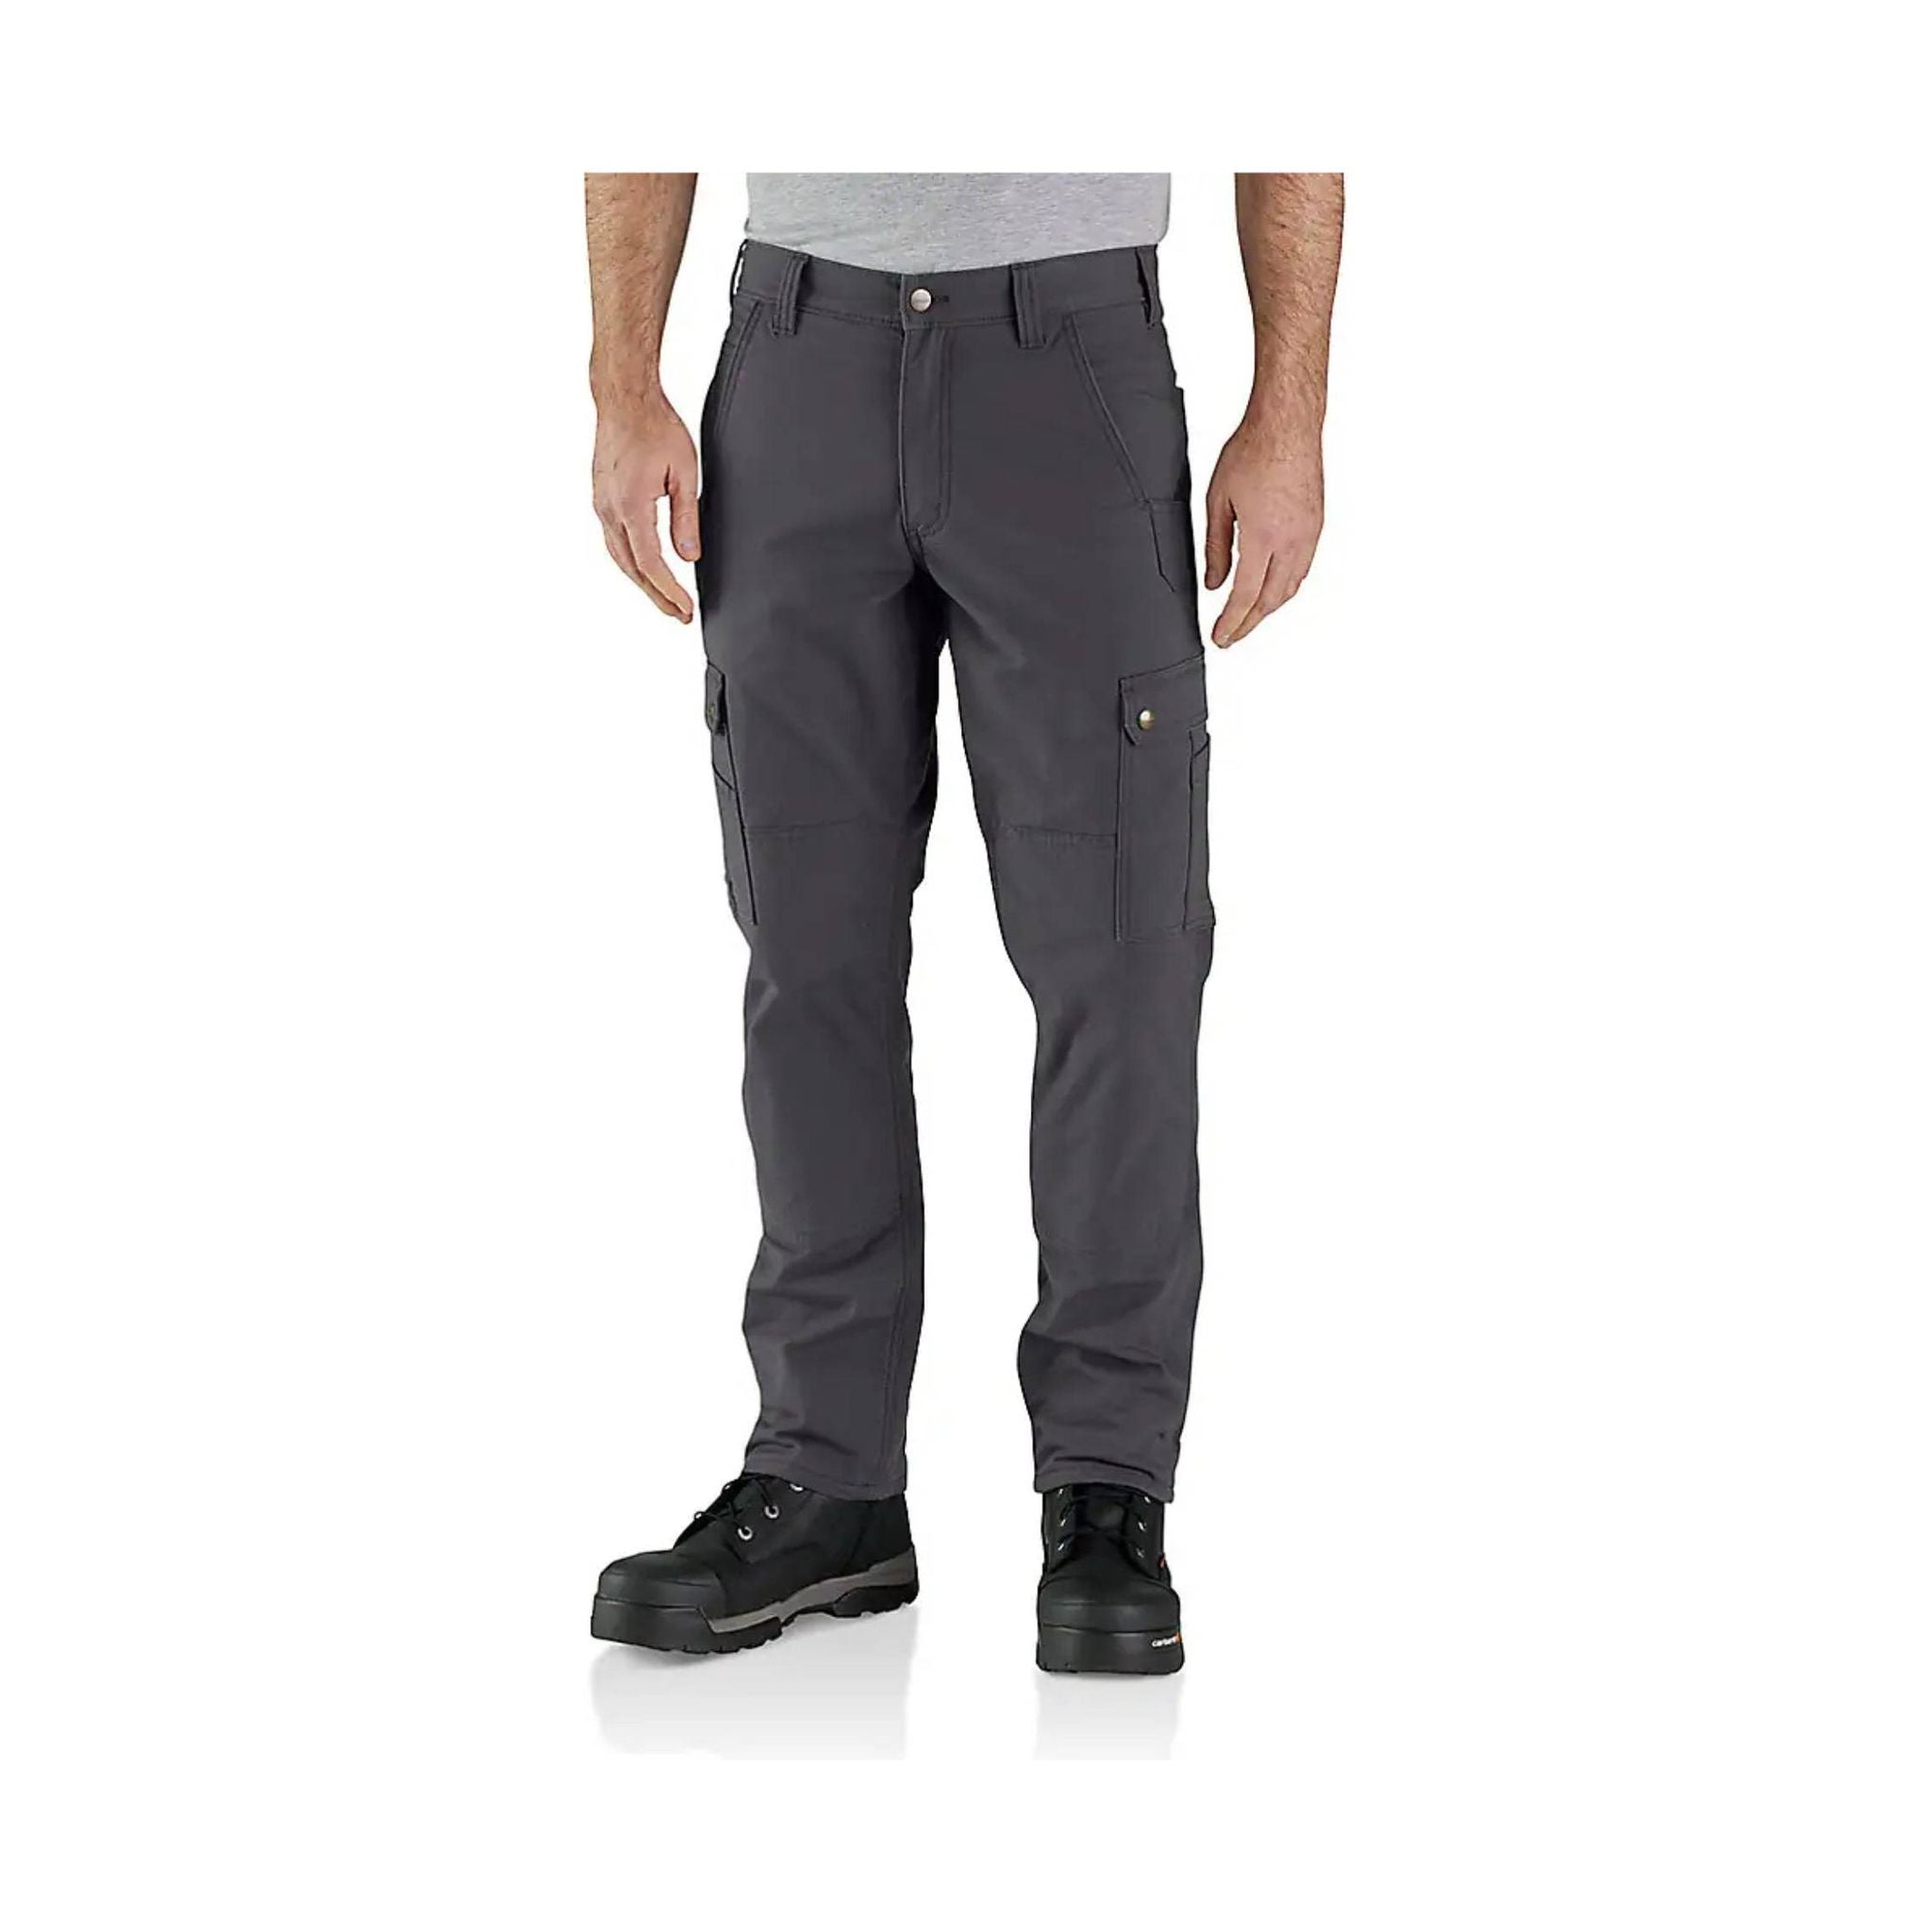 Carhartt Rugged Flex Relaxed Fit Duck Dungaree Pant - Men's - Clothing